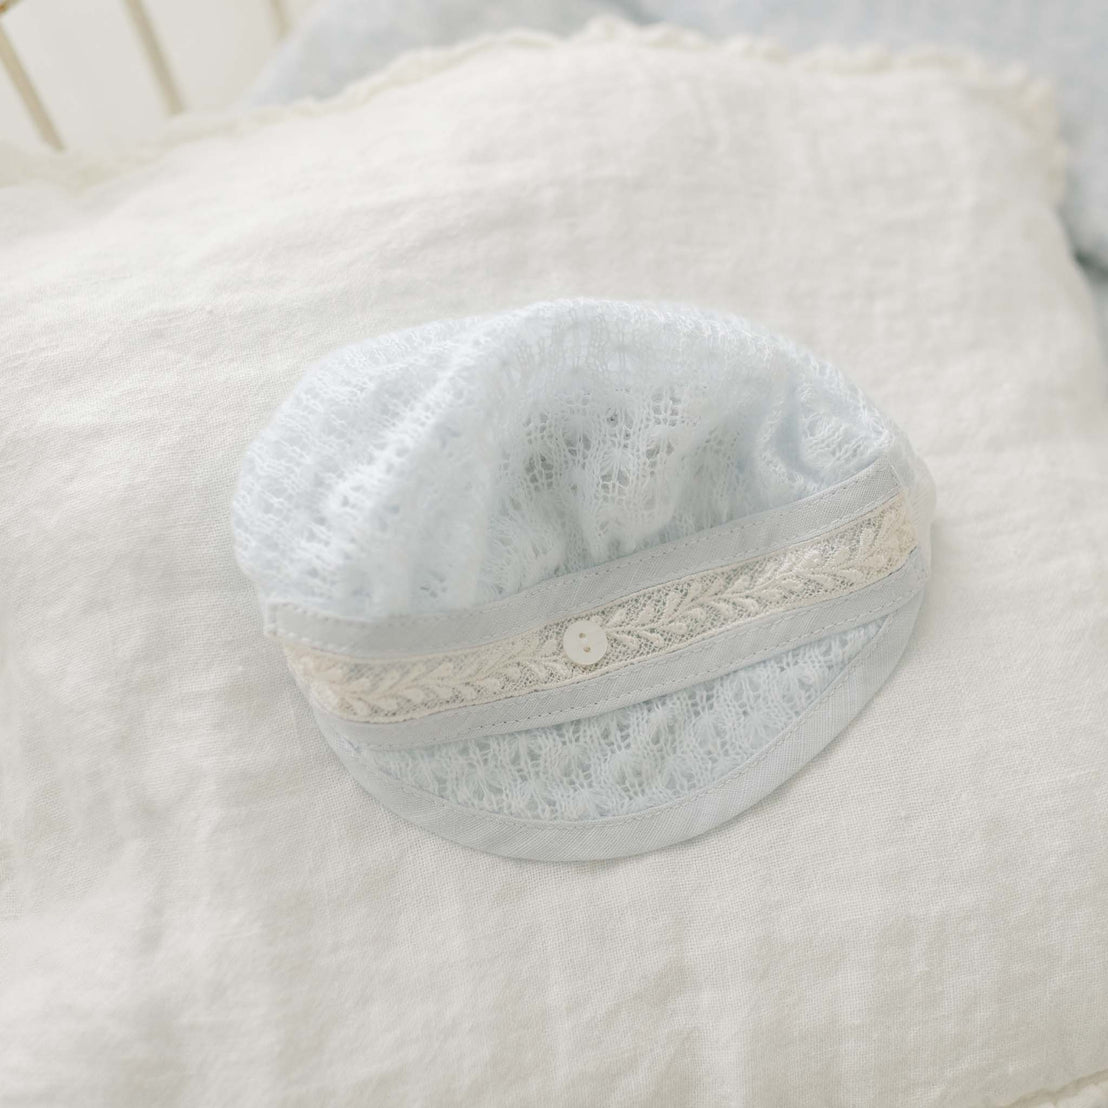 The Harrison Blue Knit Hat, handmade in the USA, rests gently on a soft, white pillow. Adorned with intricate lace trim and a small button at its center, it exudes vintage charm. The background of lighter blue fabric enhances the newborn baby's comfort.